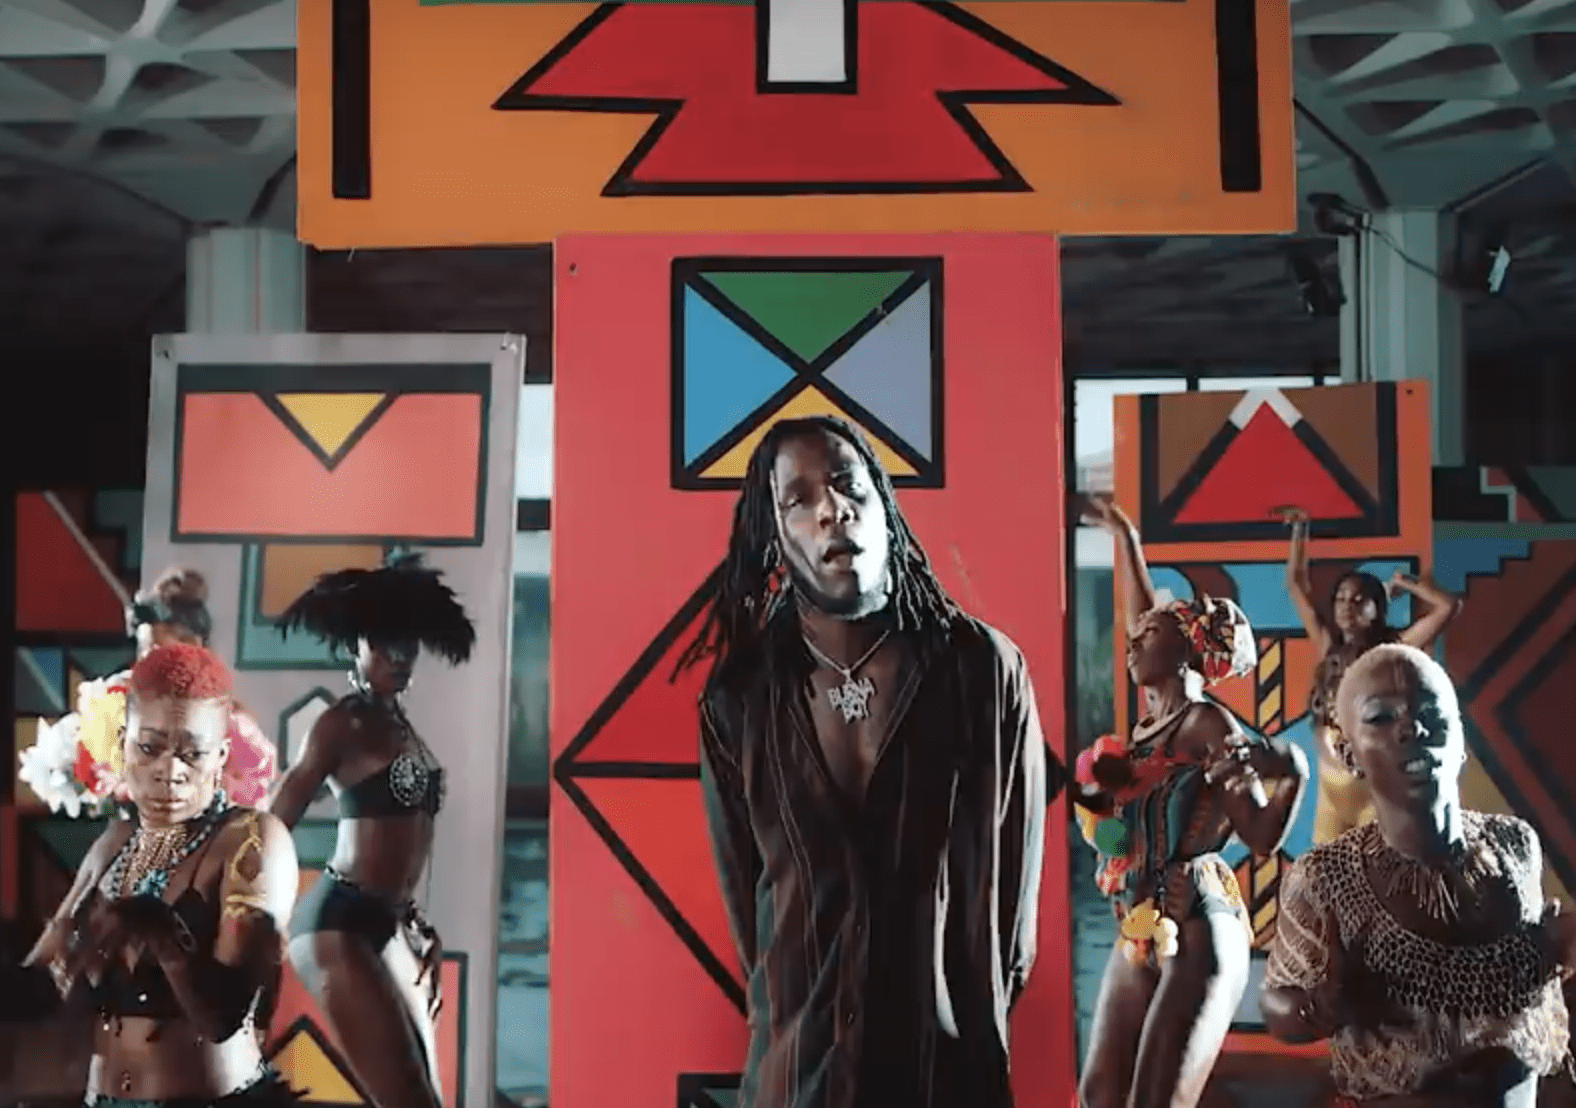 Burna Boy’s official music video for “Gbona” is a delight to watch